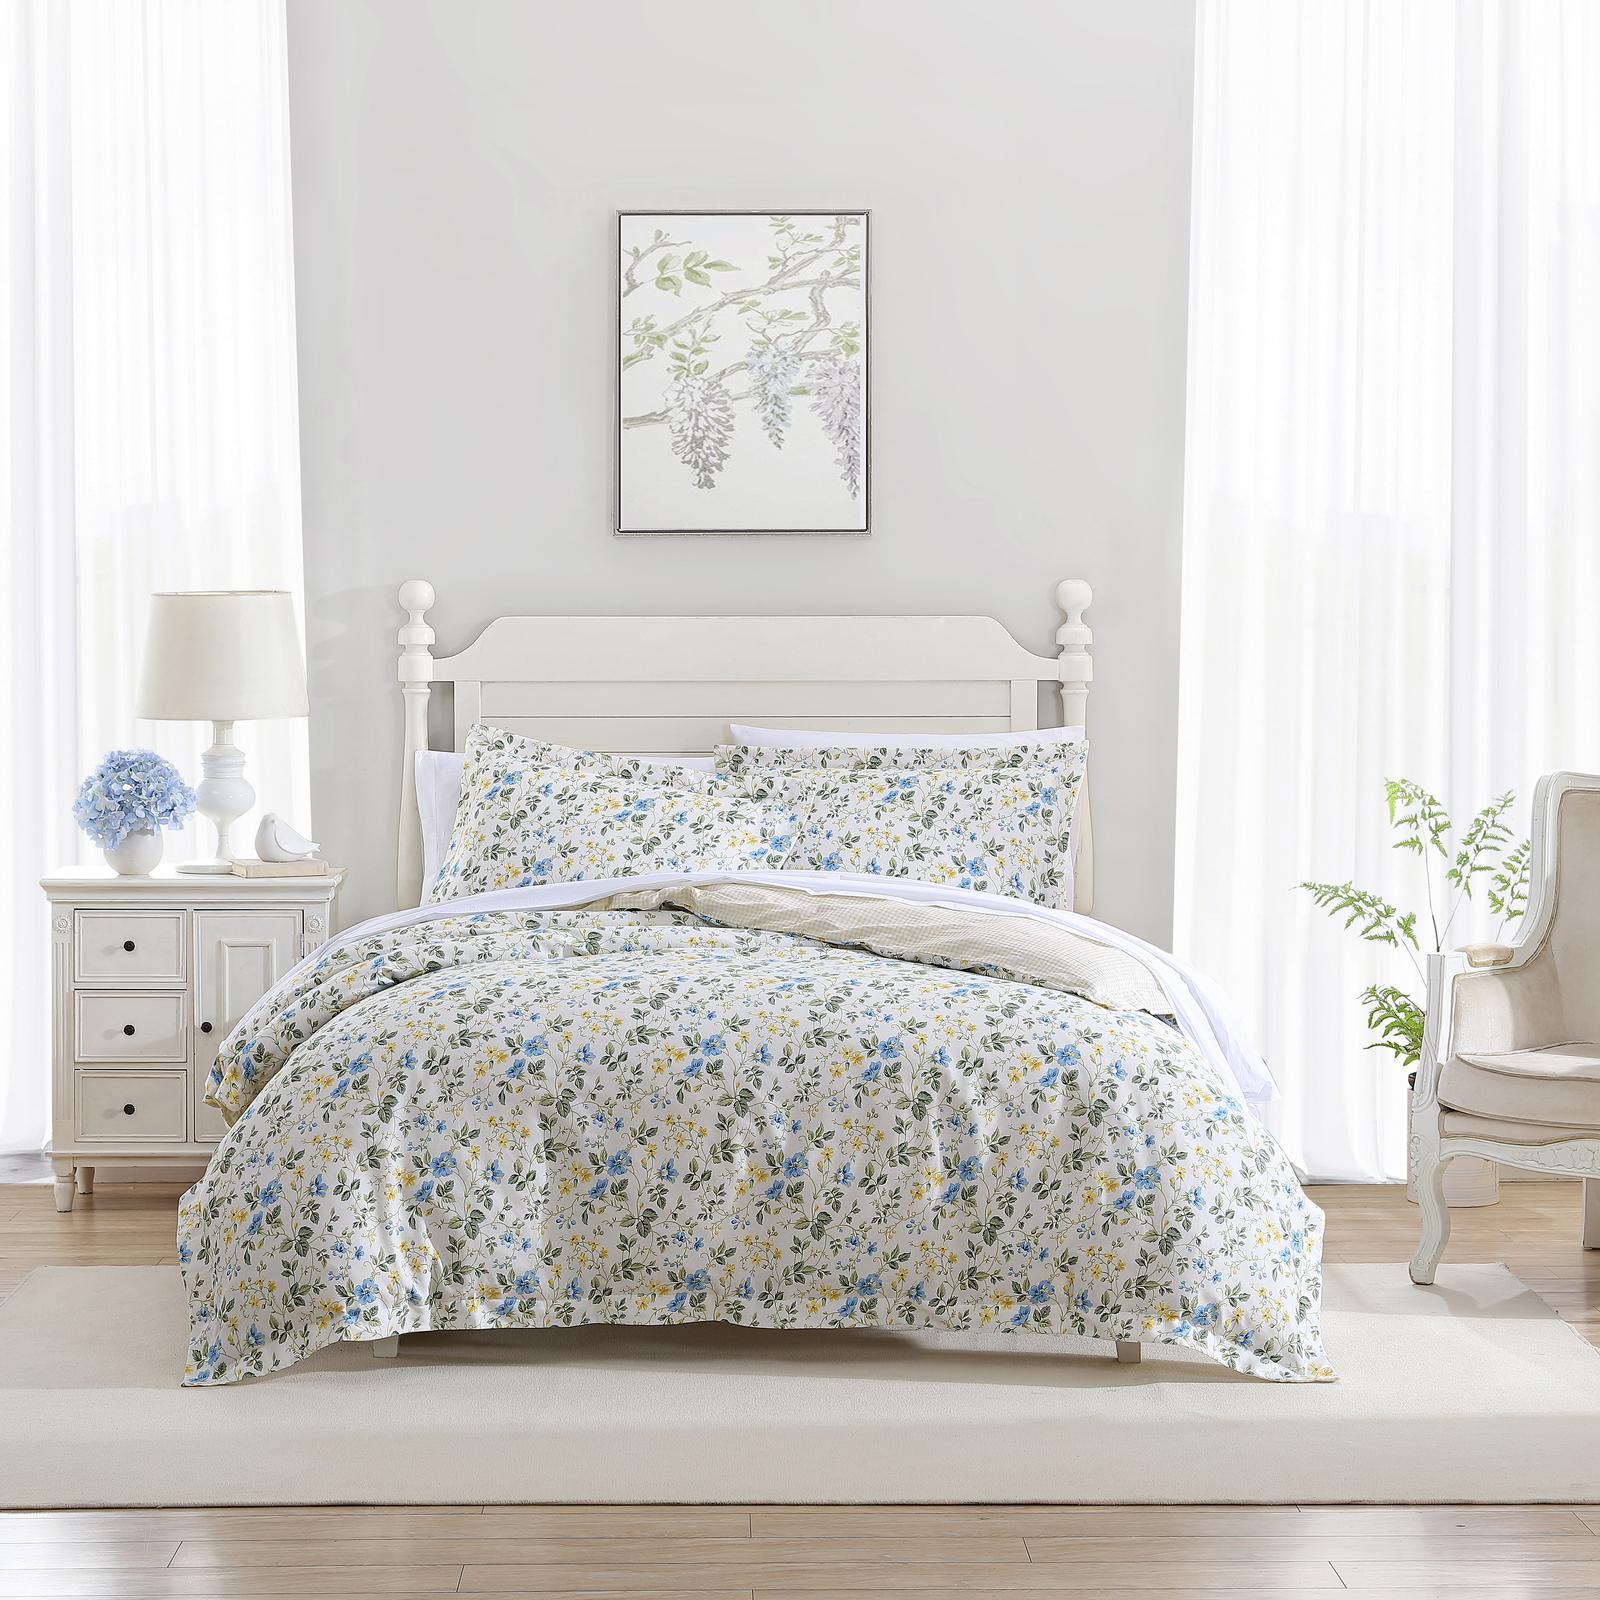 Laura Ashley Meadow Floral King Bed Quilt Cover Set w/ 2x Pillowcase Sun Blue